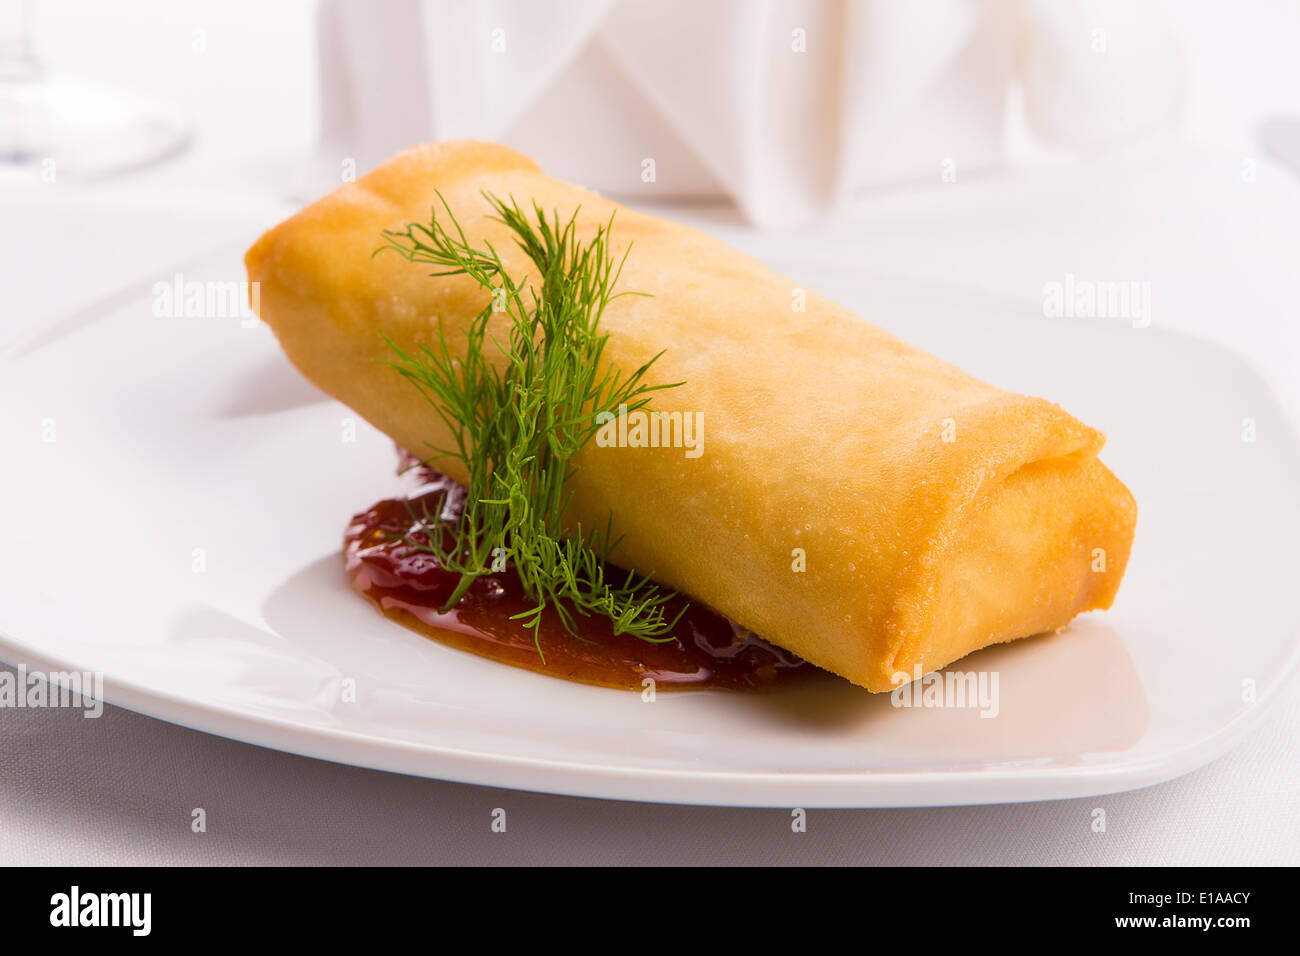 Classy eggroll served on spicy sauce along with dill Stock Photo